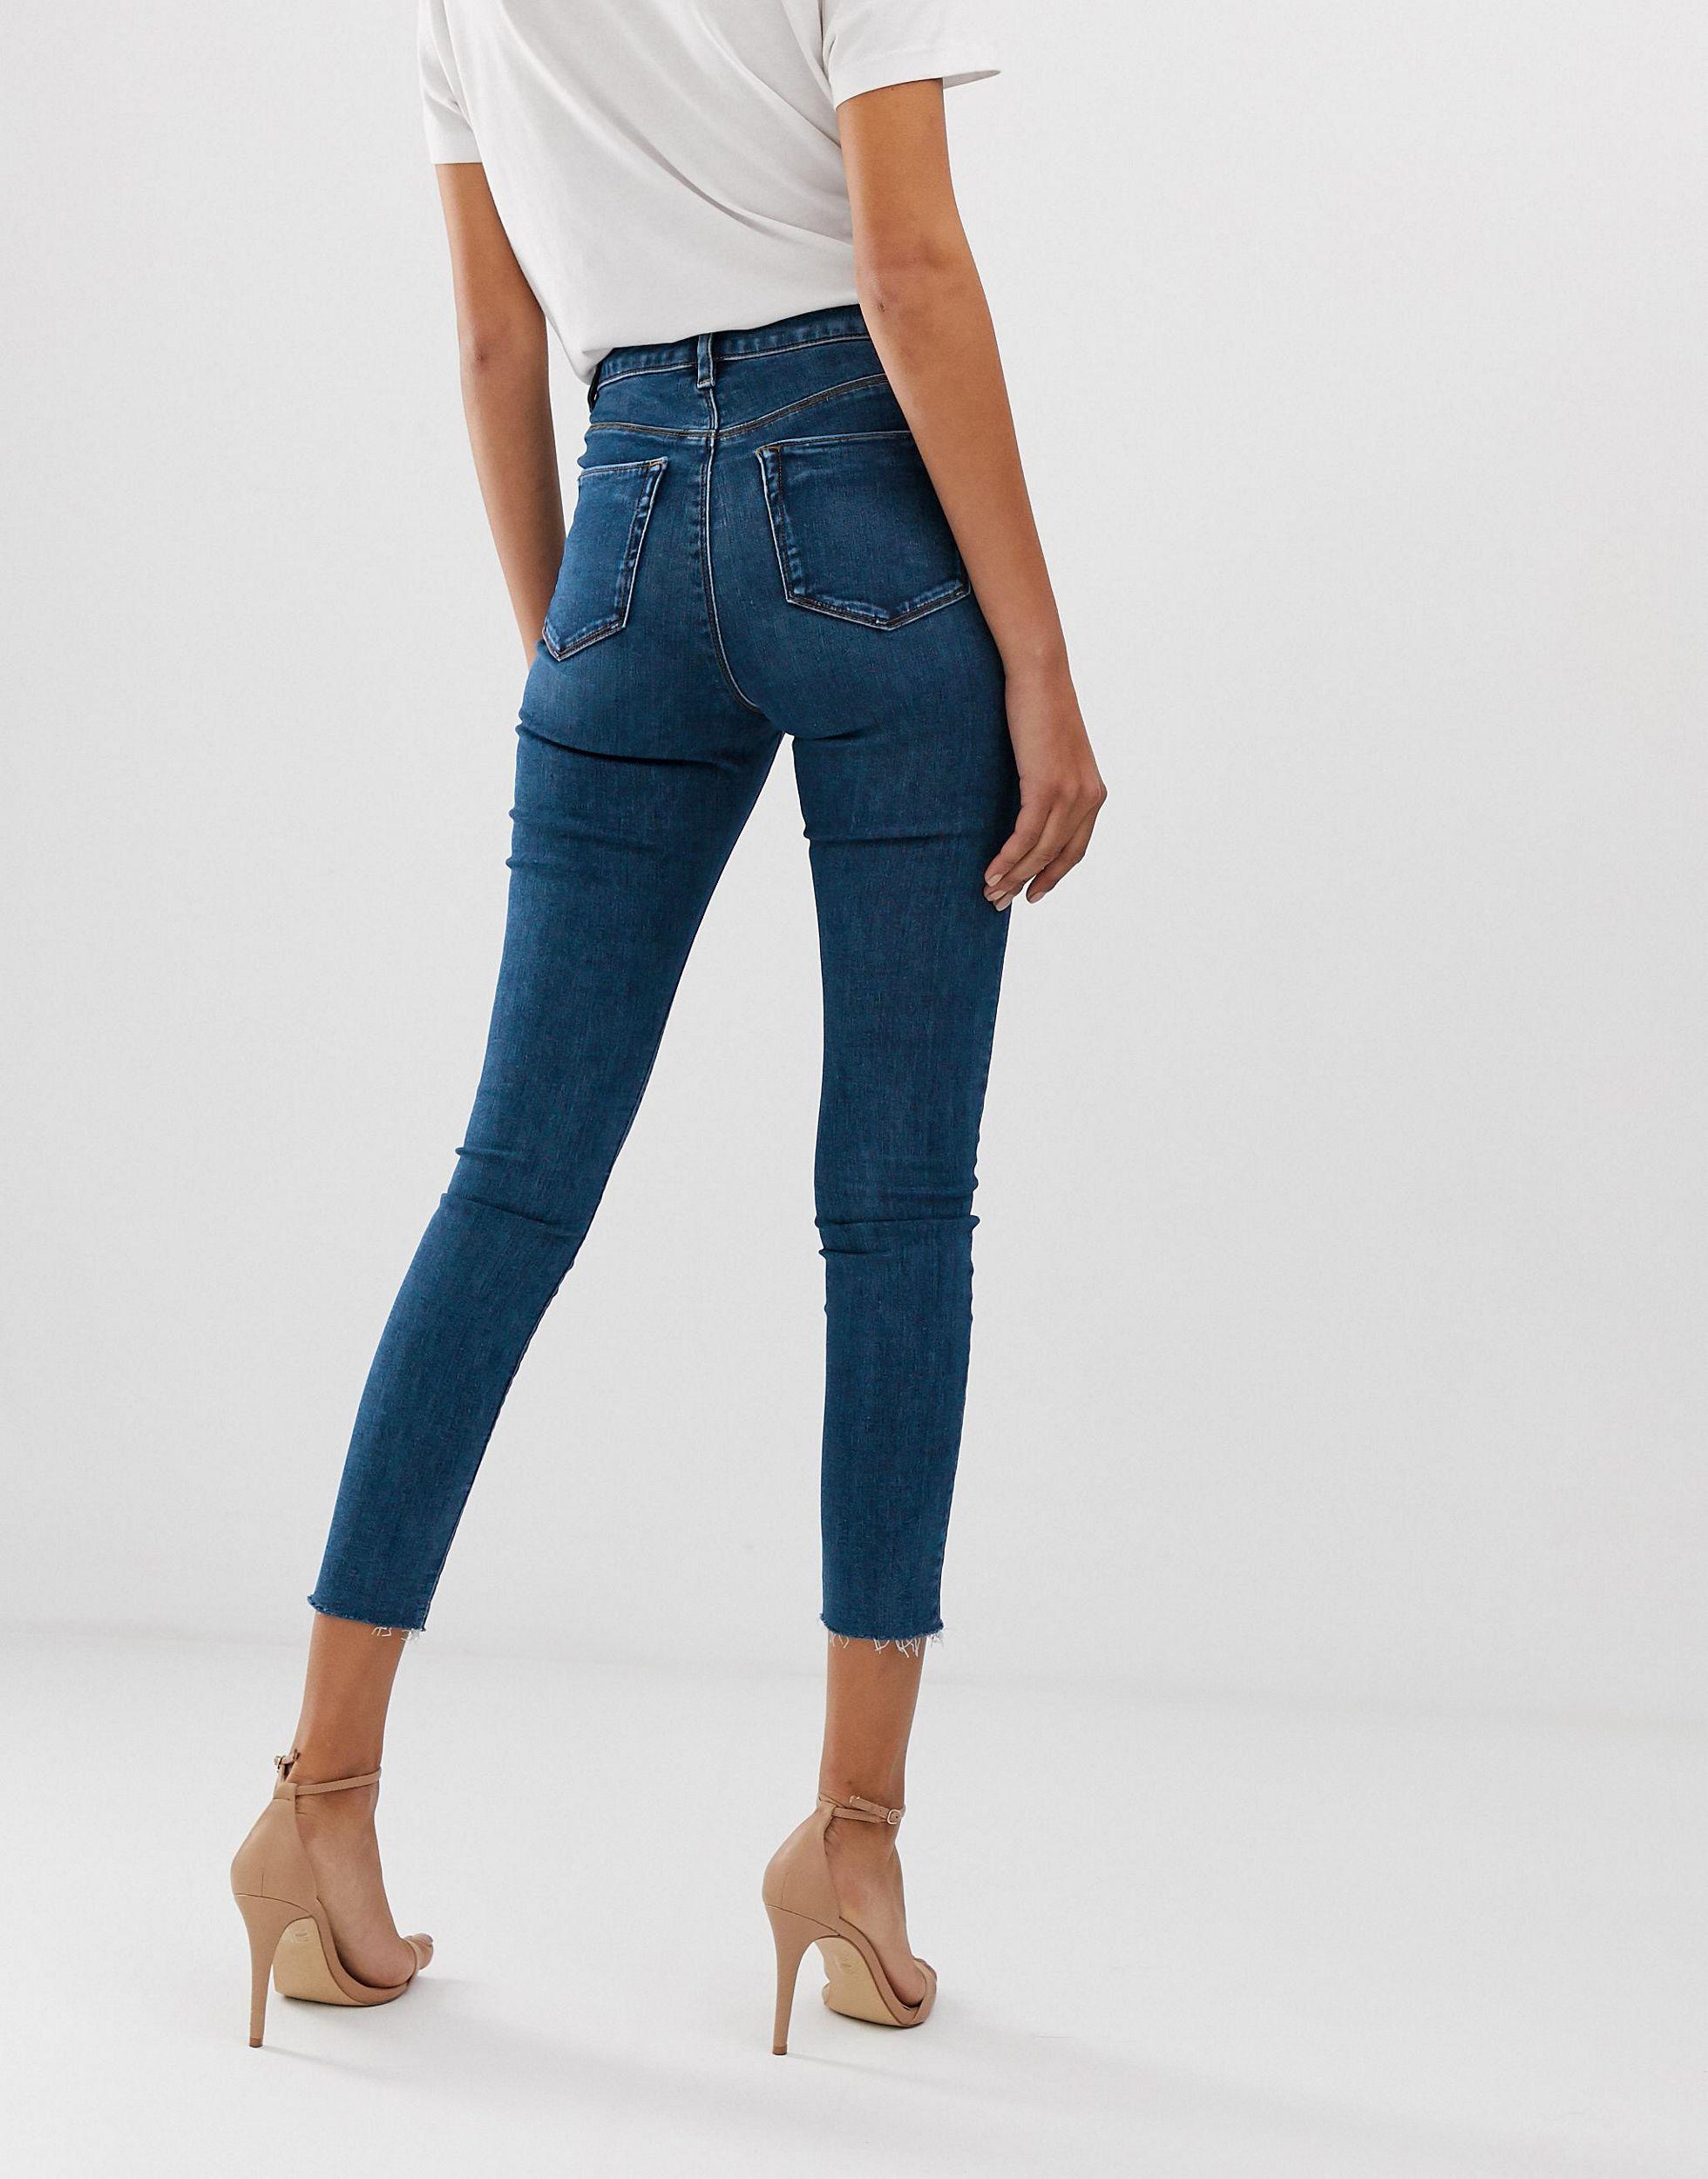 ASOS Denim Ridley High Waisted Skinny Jeans In Mid Wash Blue With Front ...